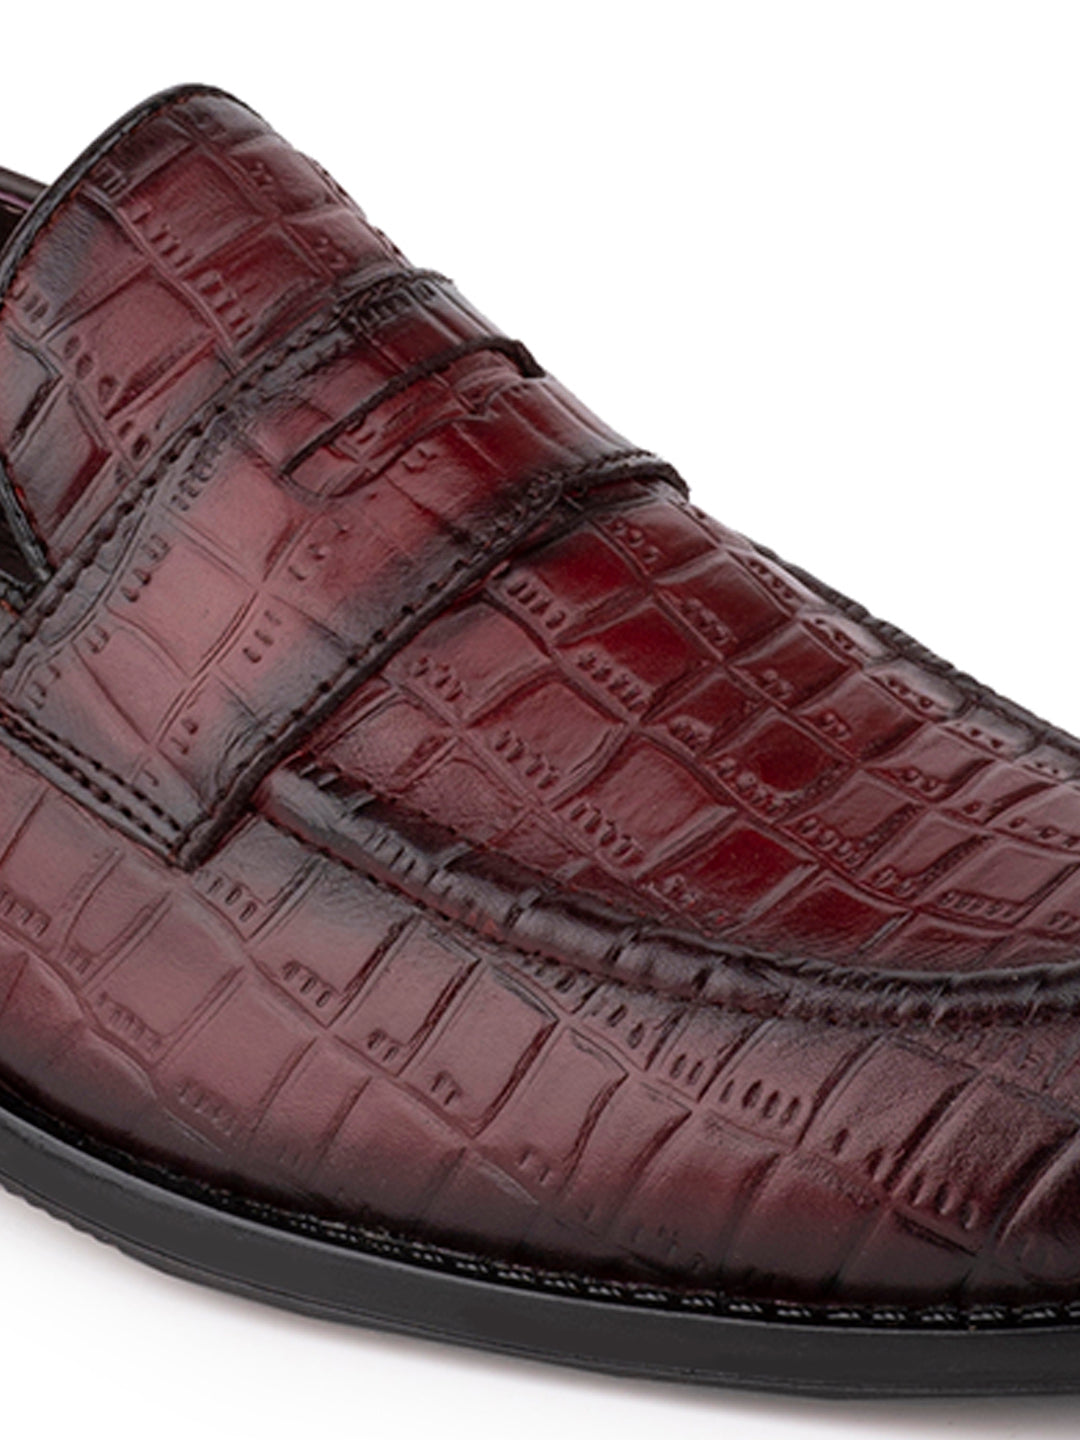 Men WINE Solid Loafers